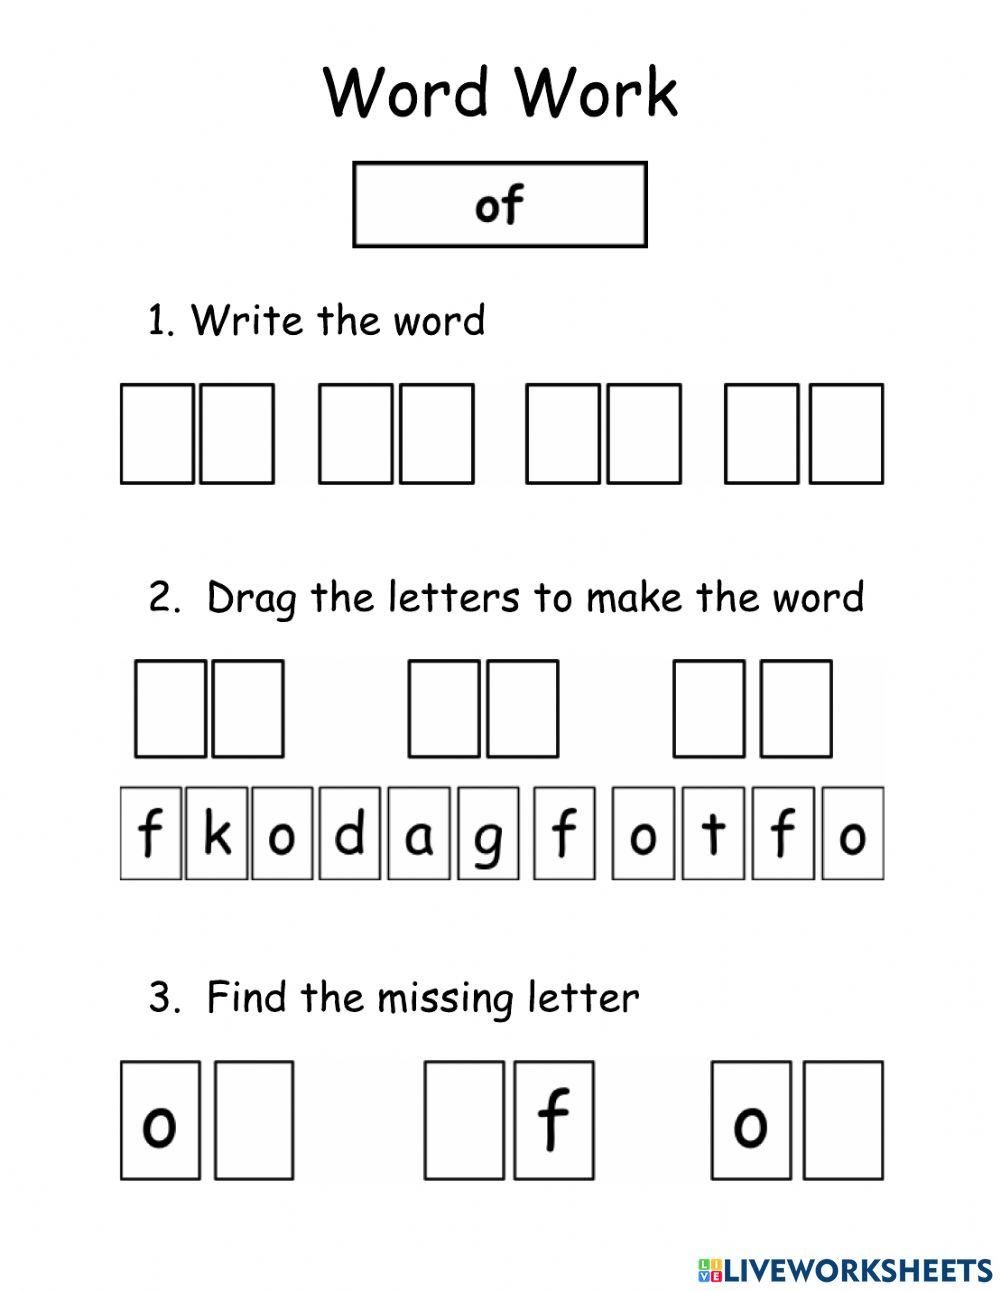 Word Work - of